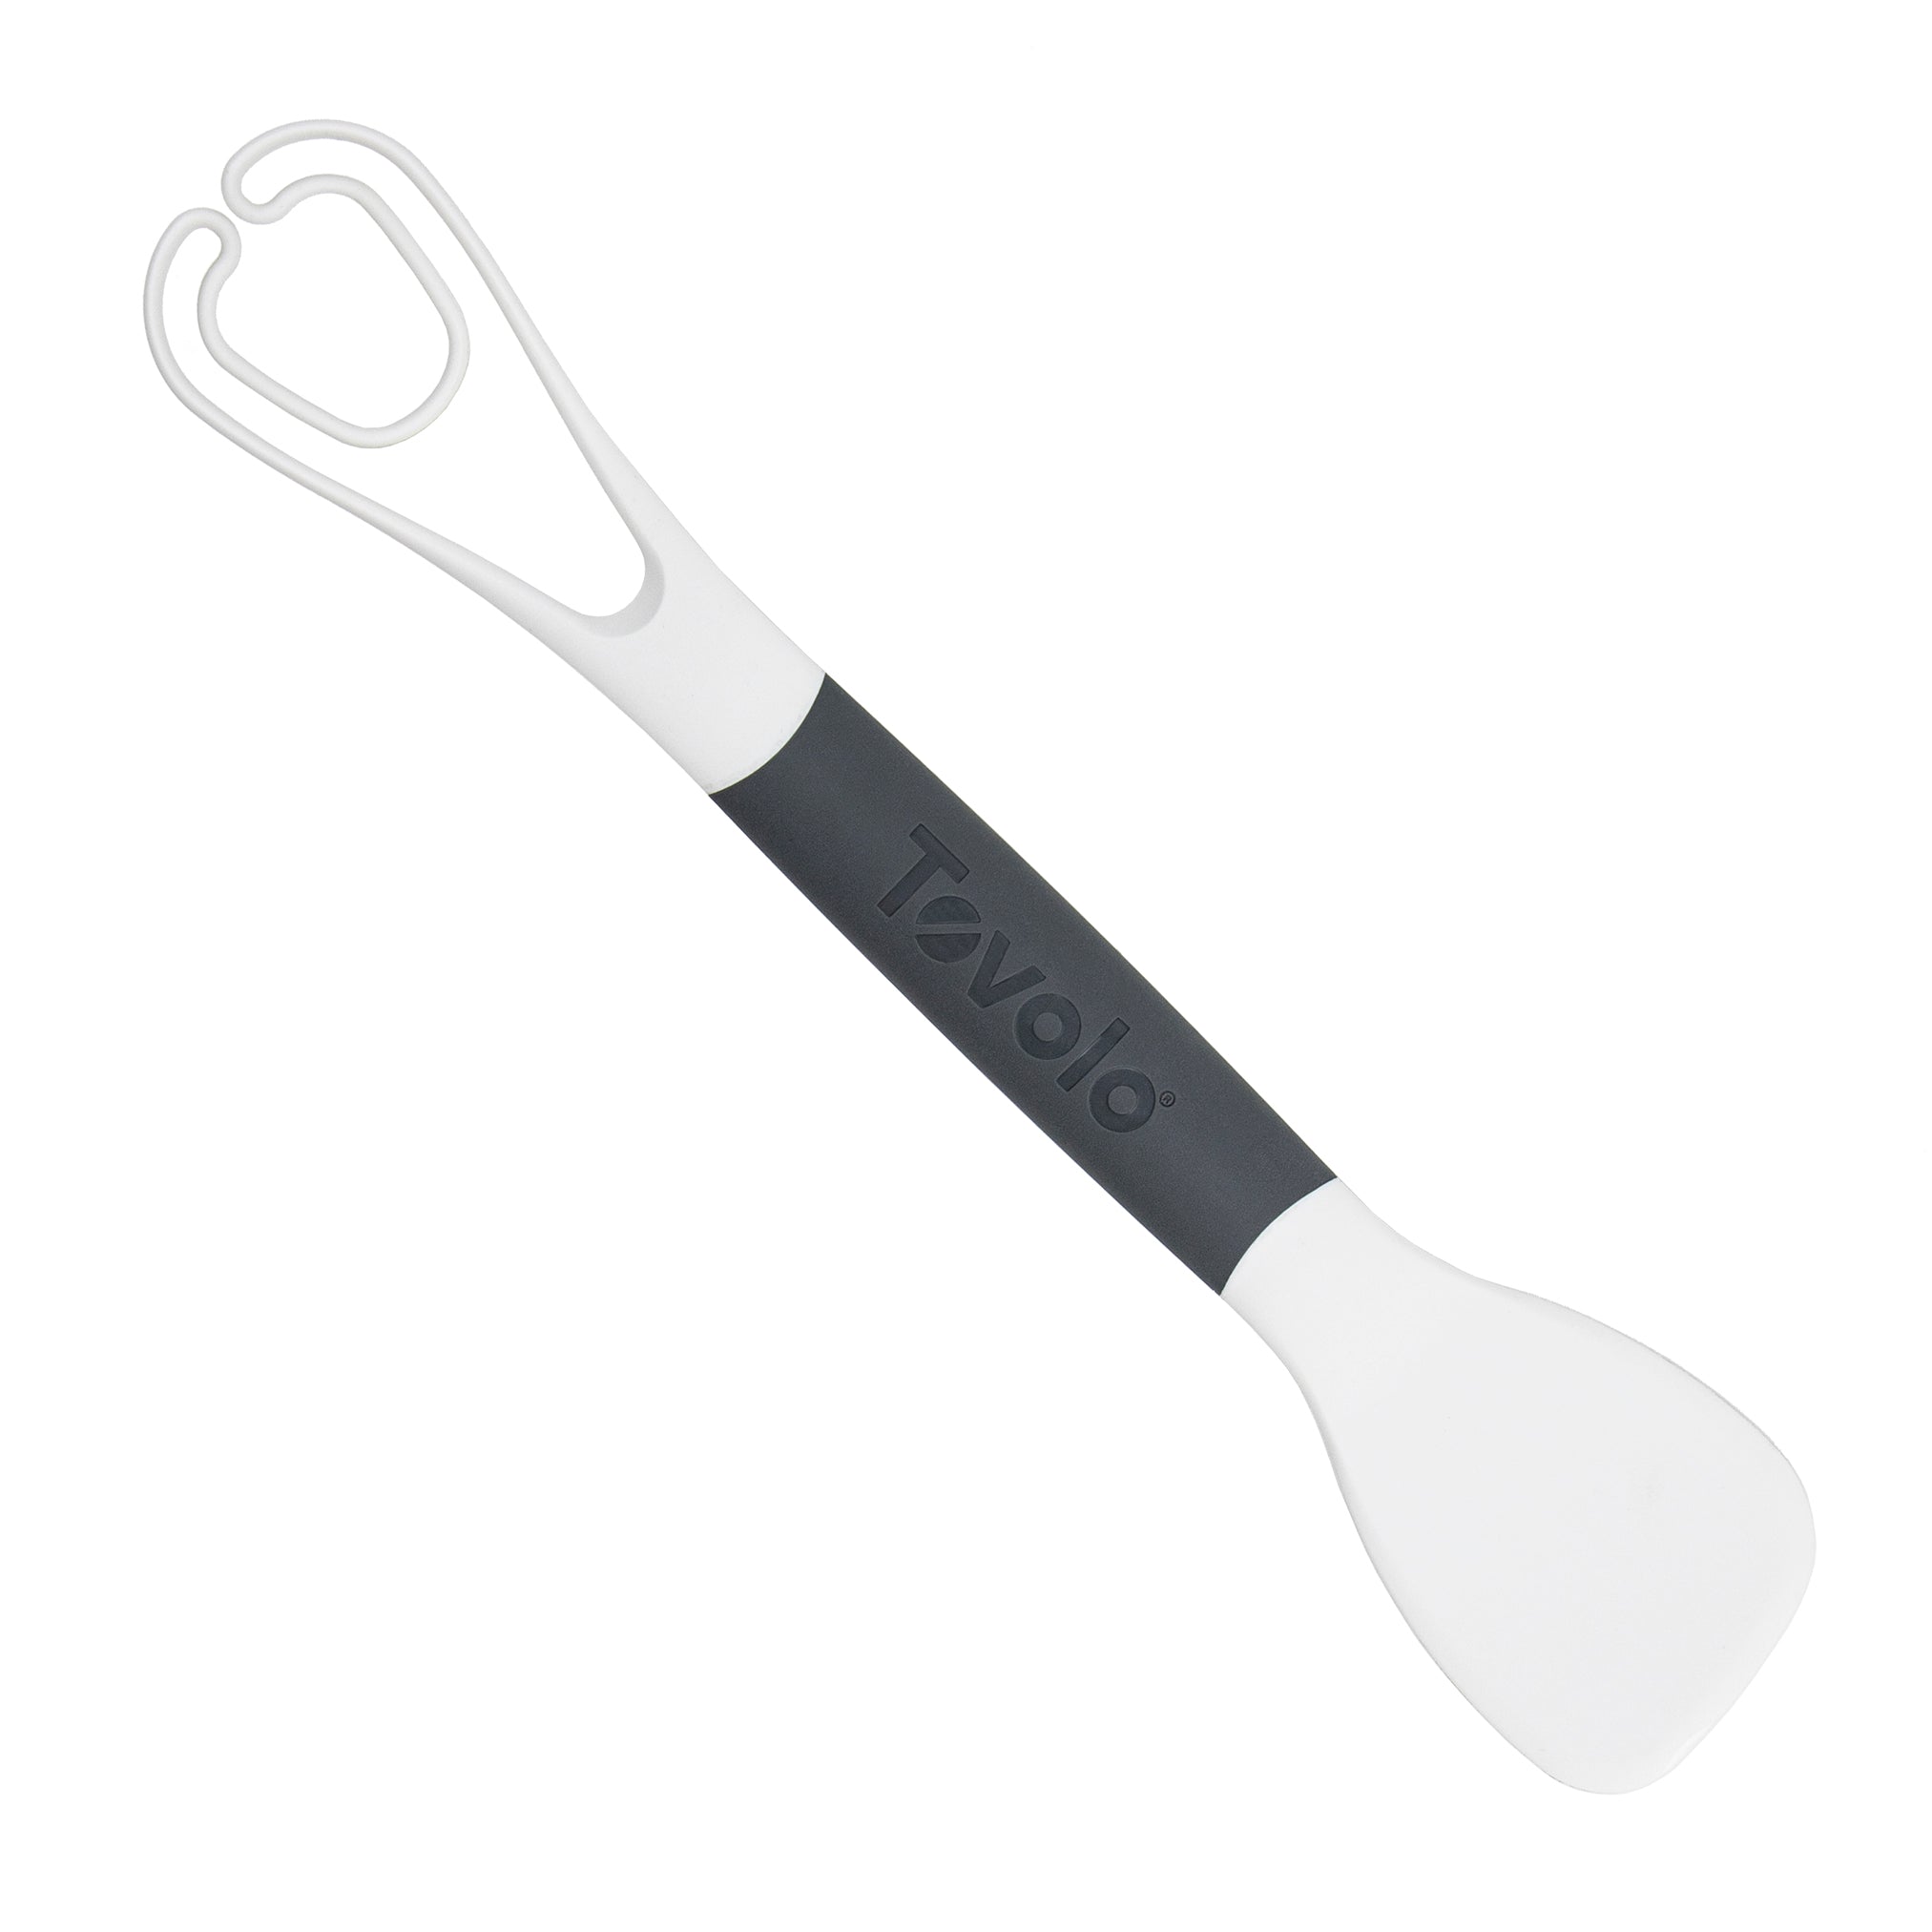 Tovolo 3-in-1 Egg Tool